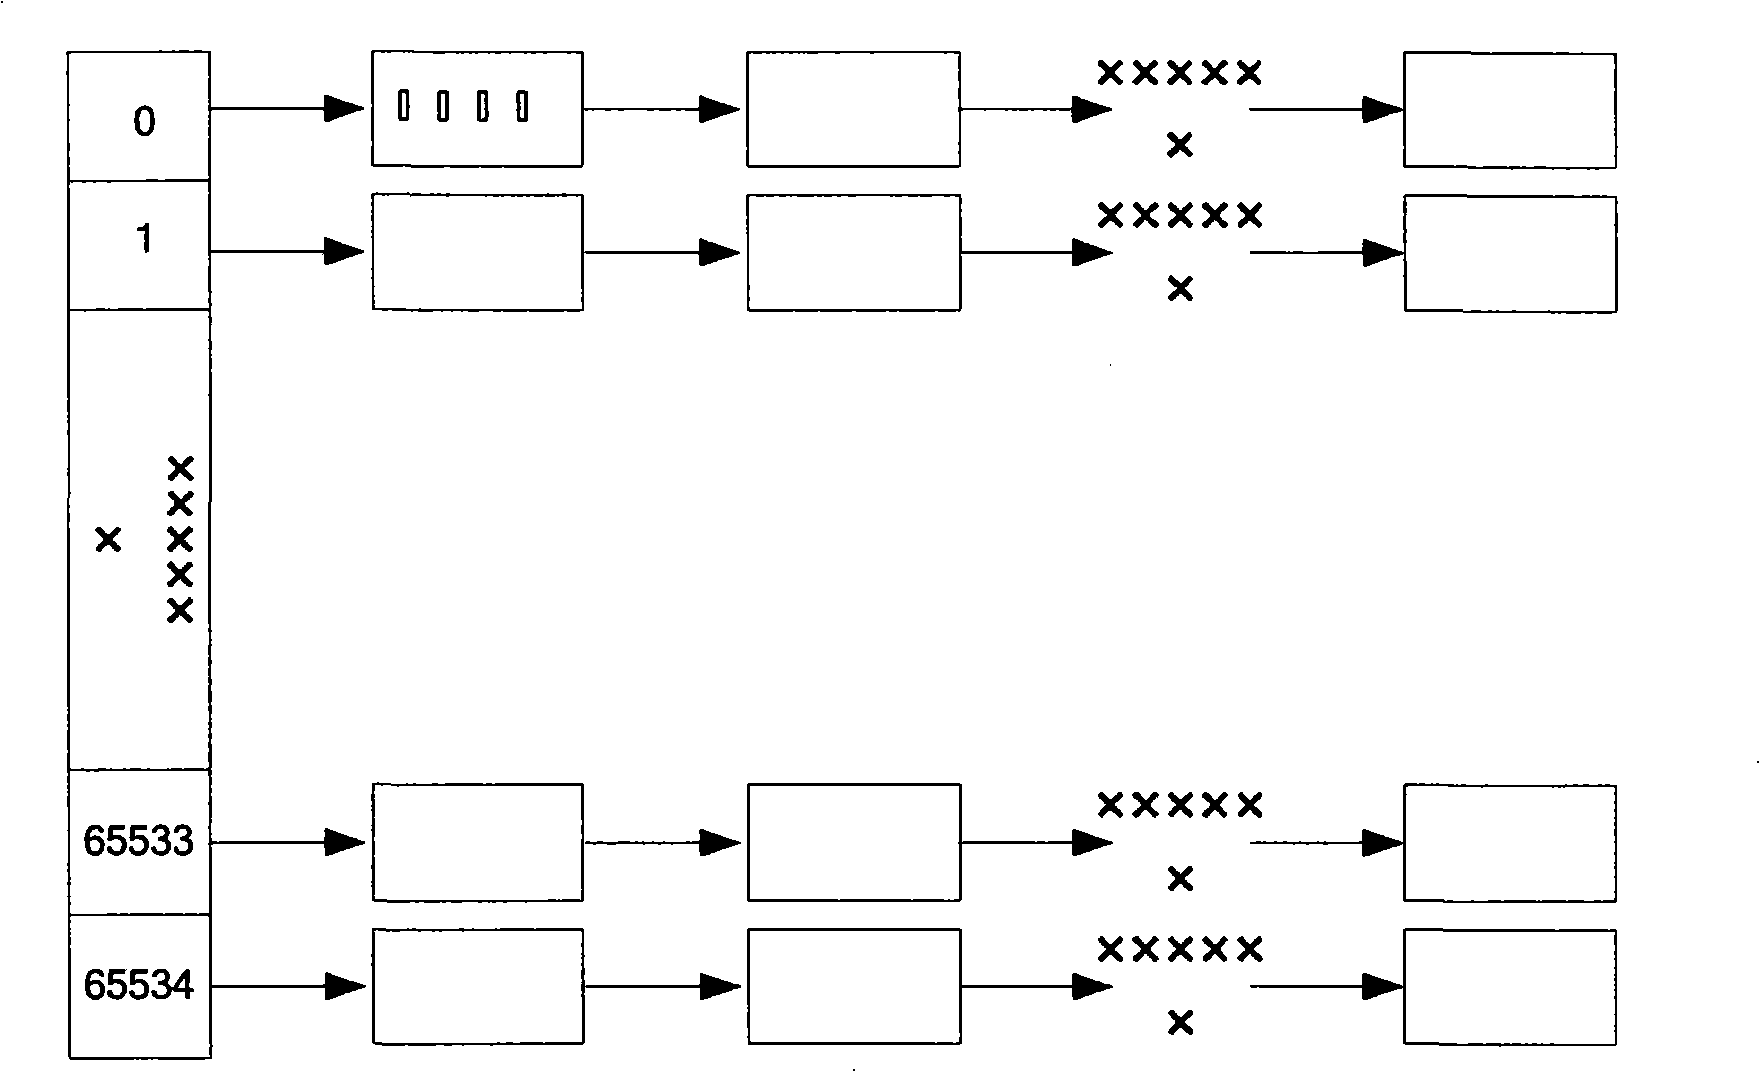 Method for locating and analyzing fault of intelligent self-adapting network based on log